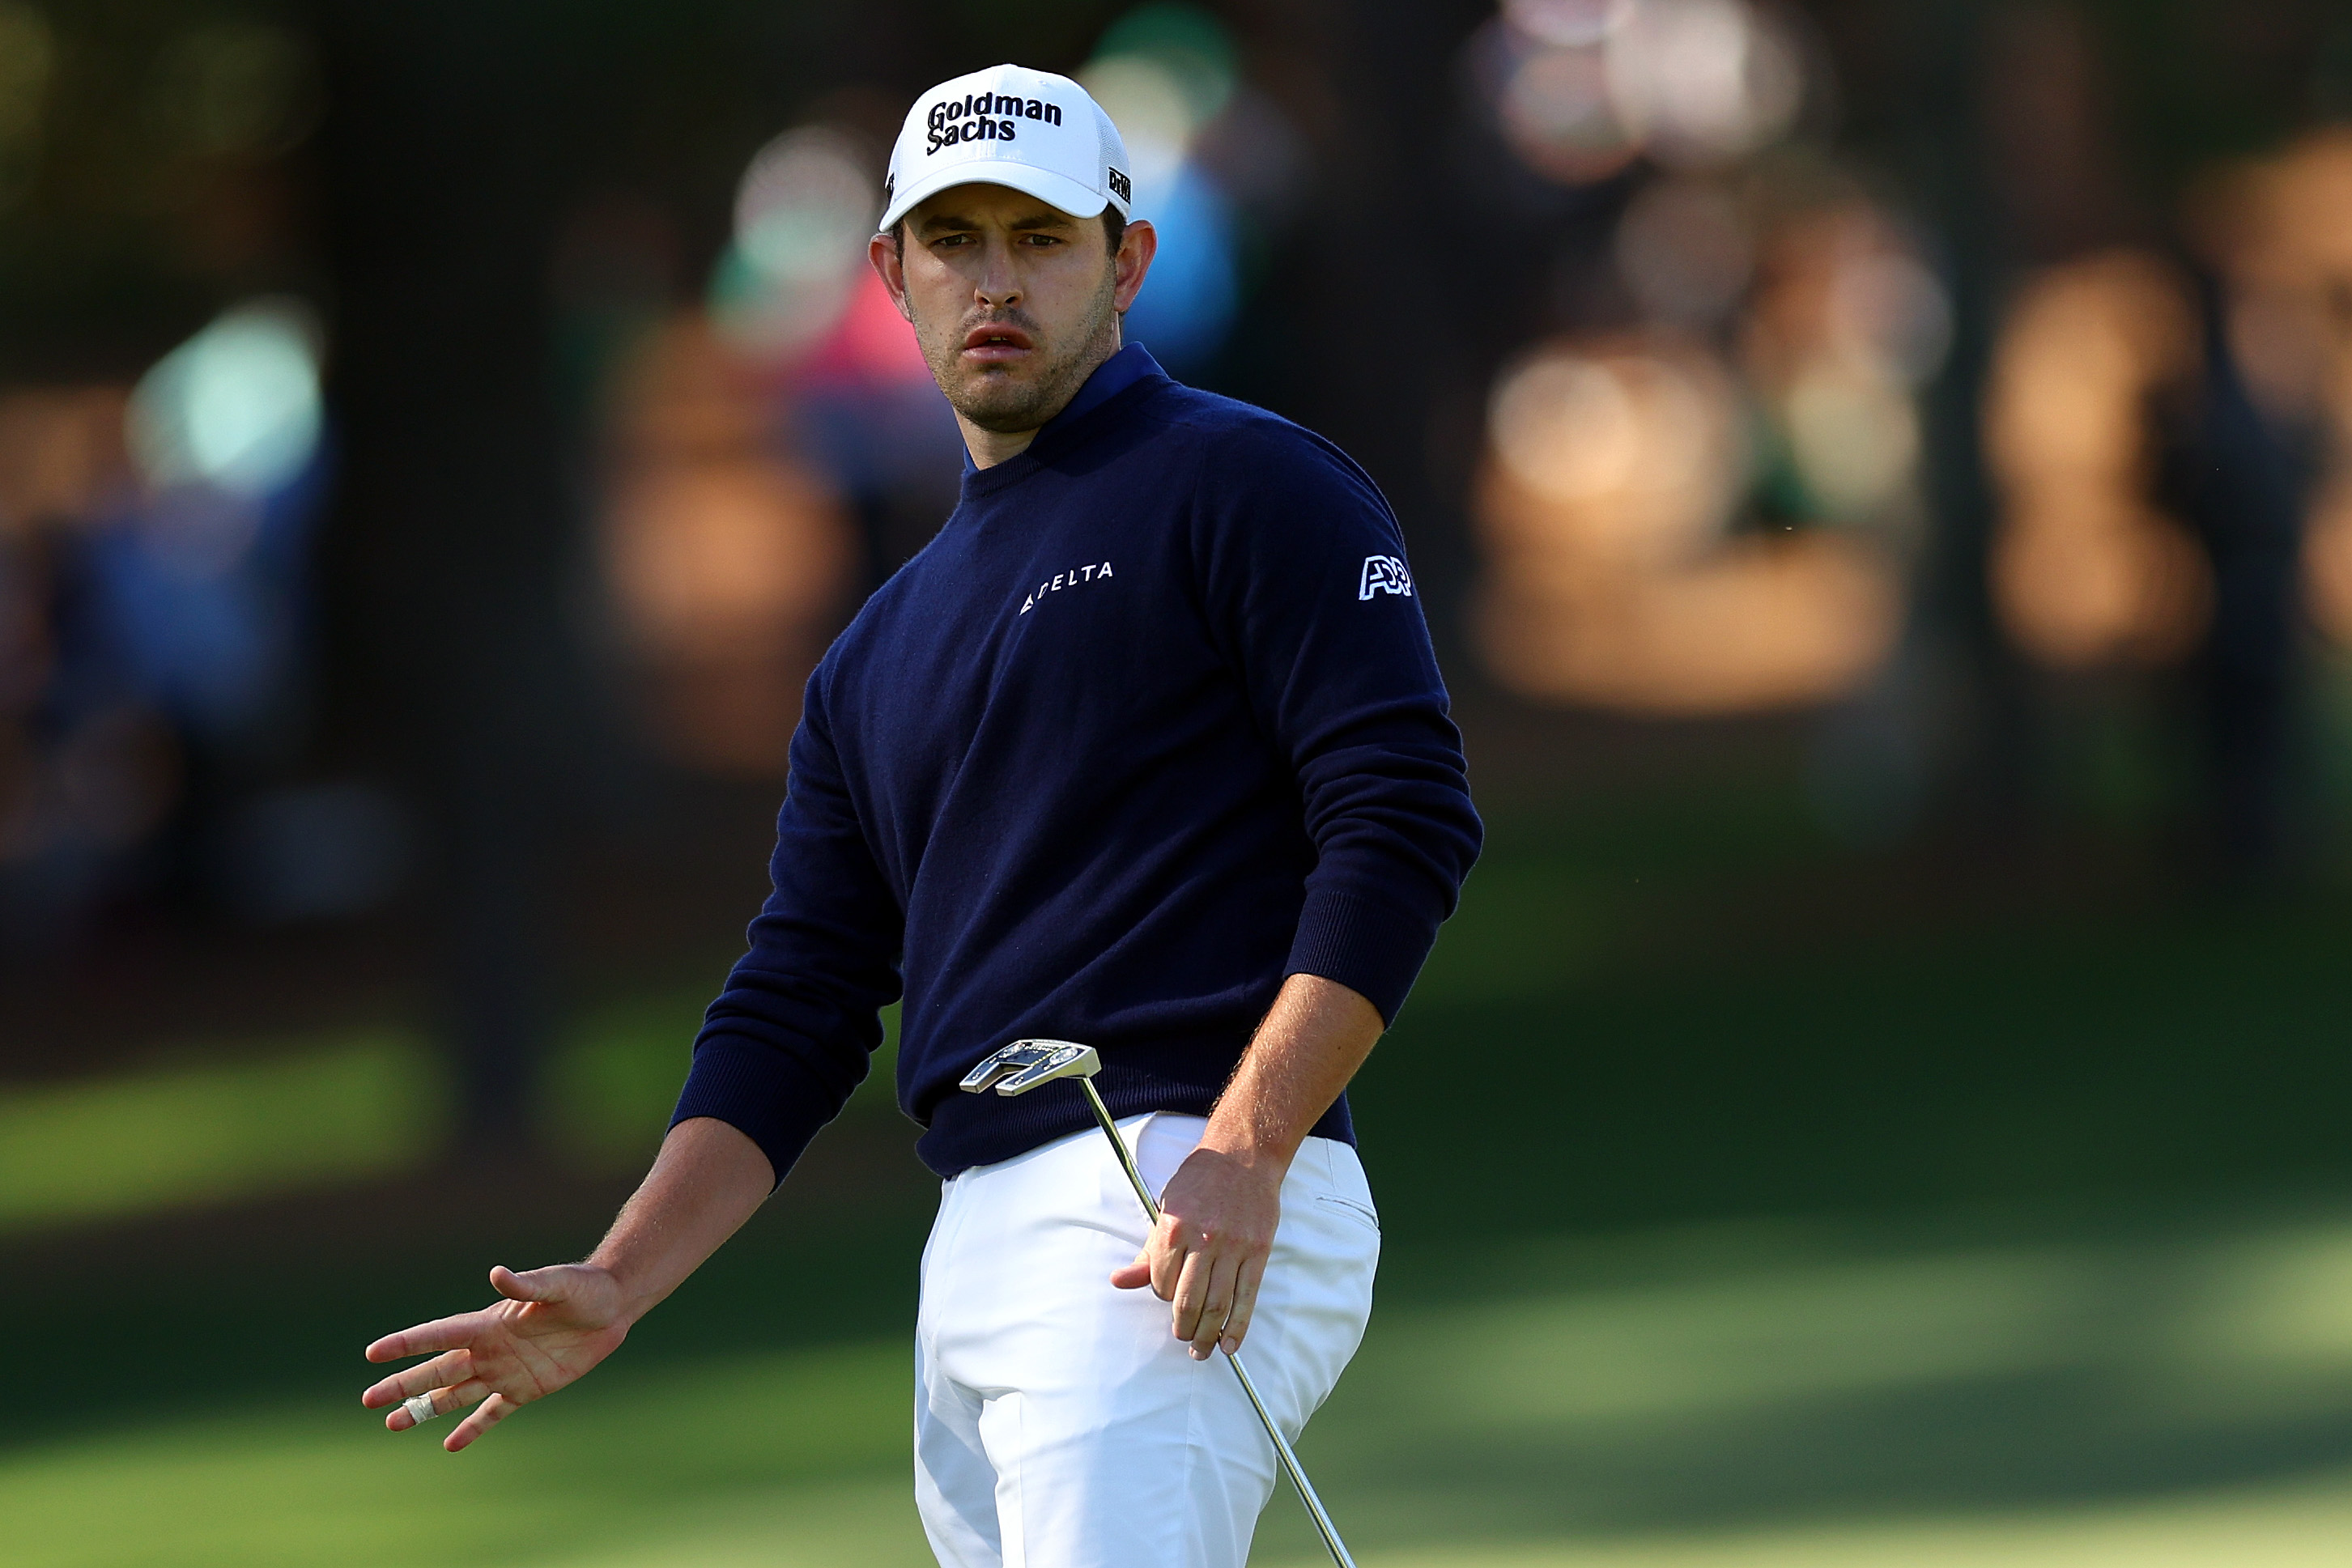 patrick cantlay live